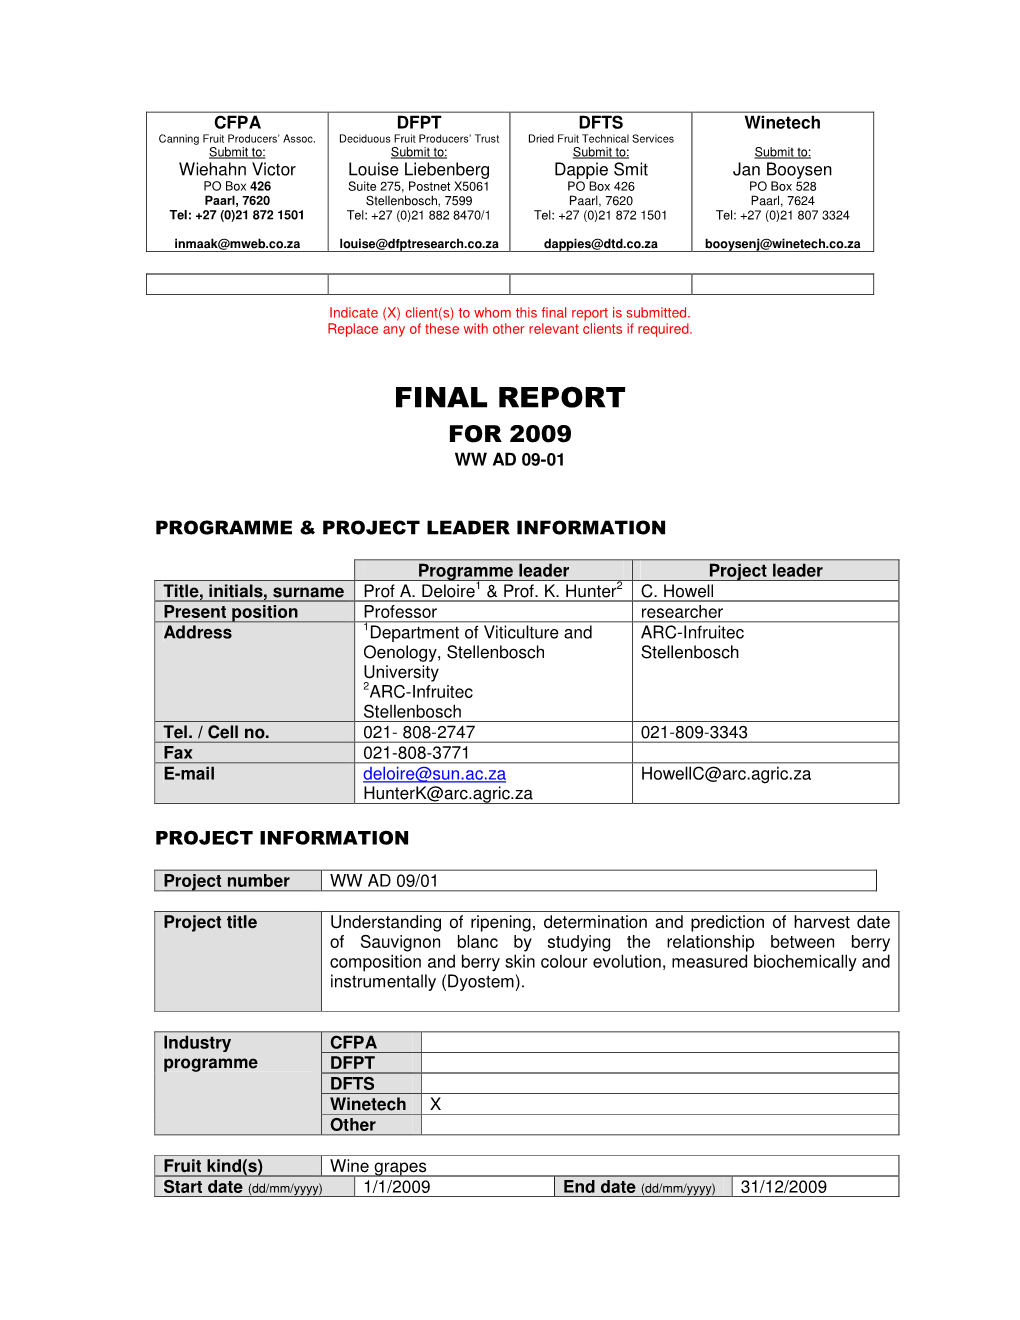 Final Report Is Submitted